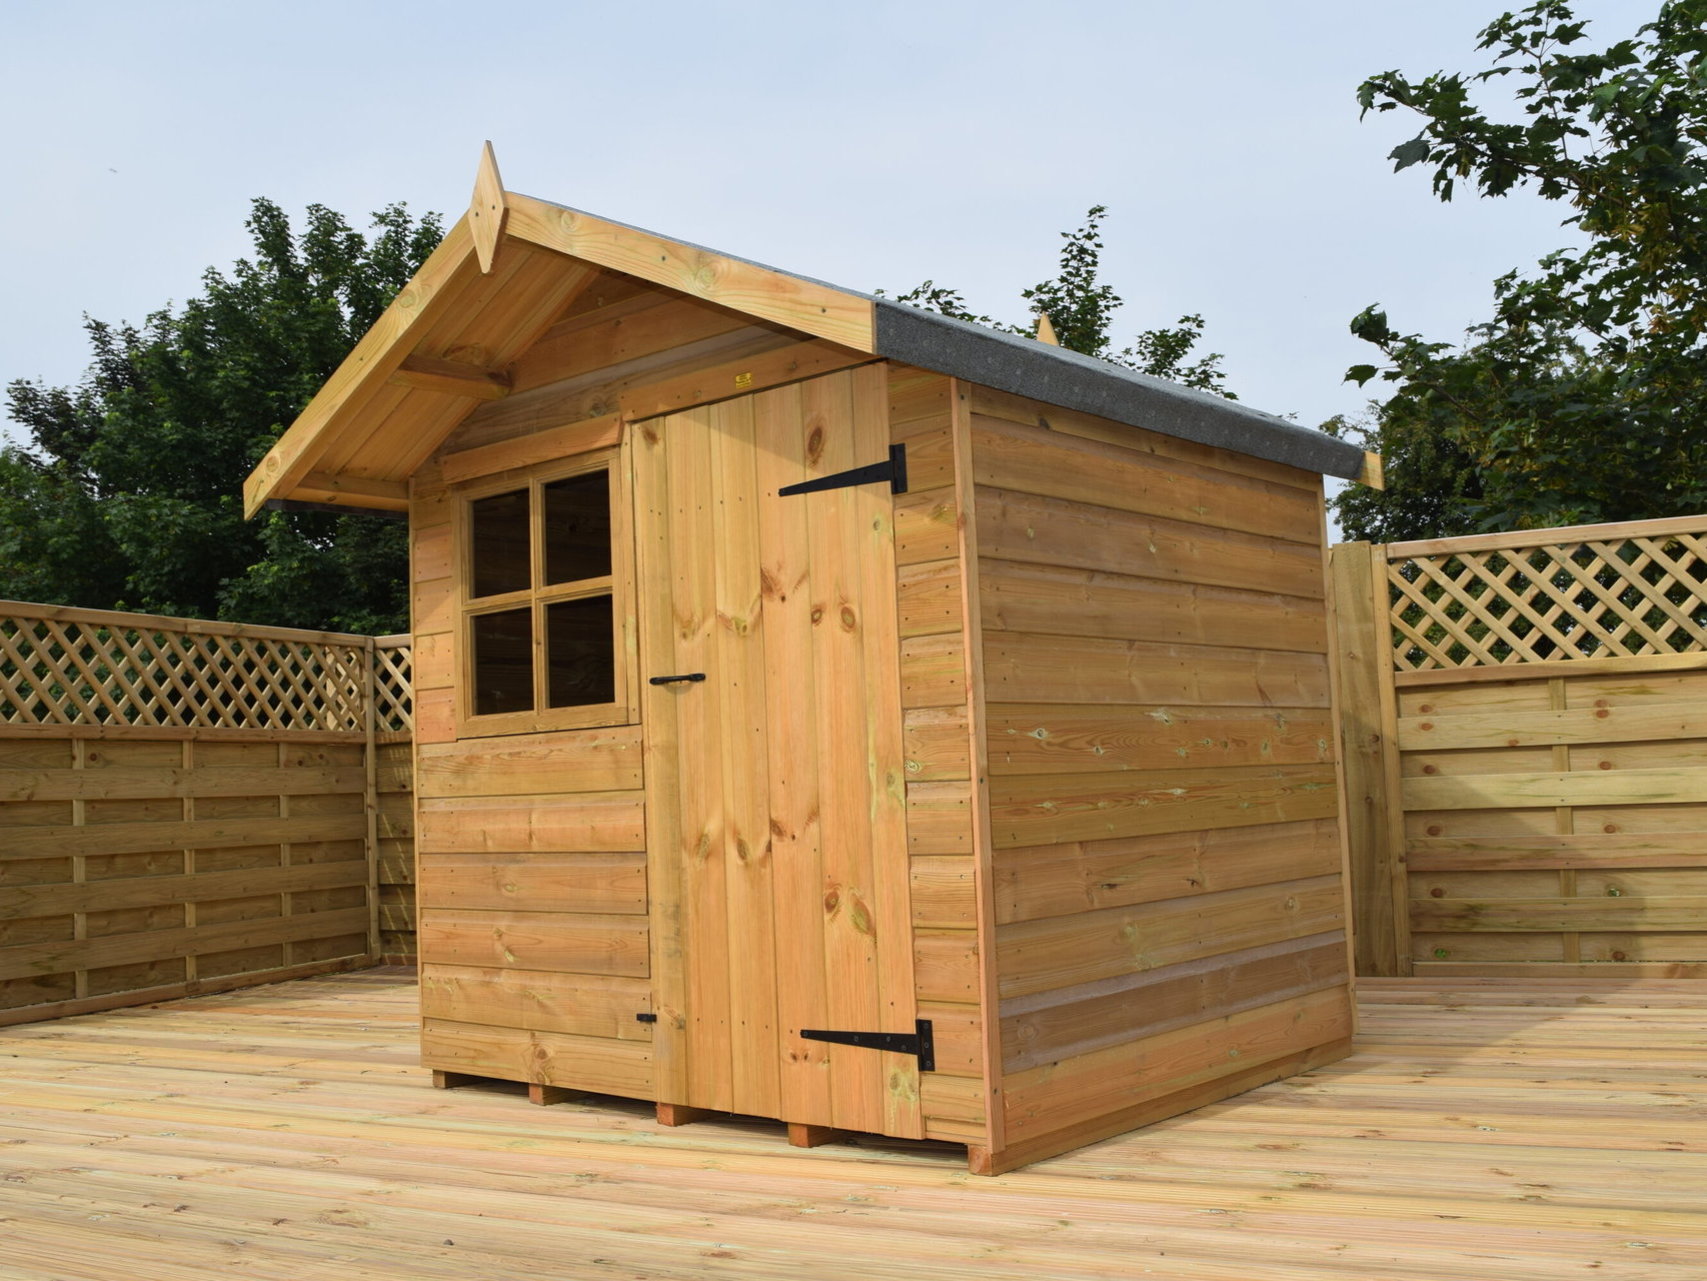 A shed on decking